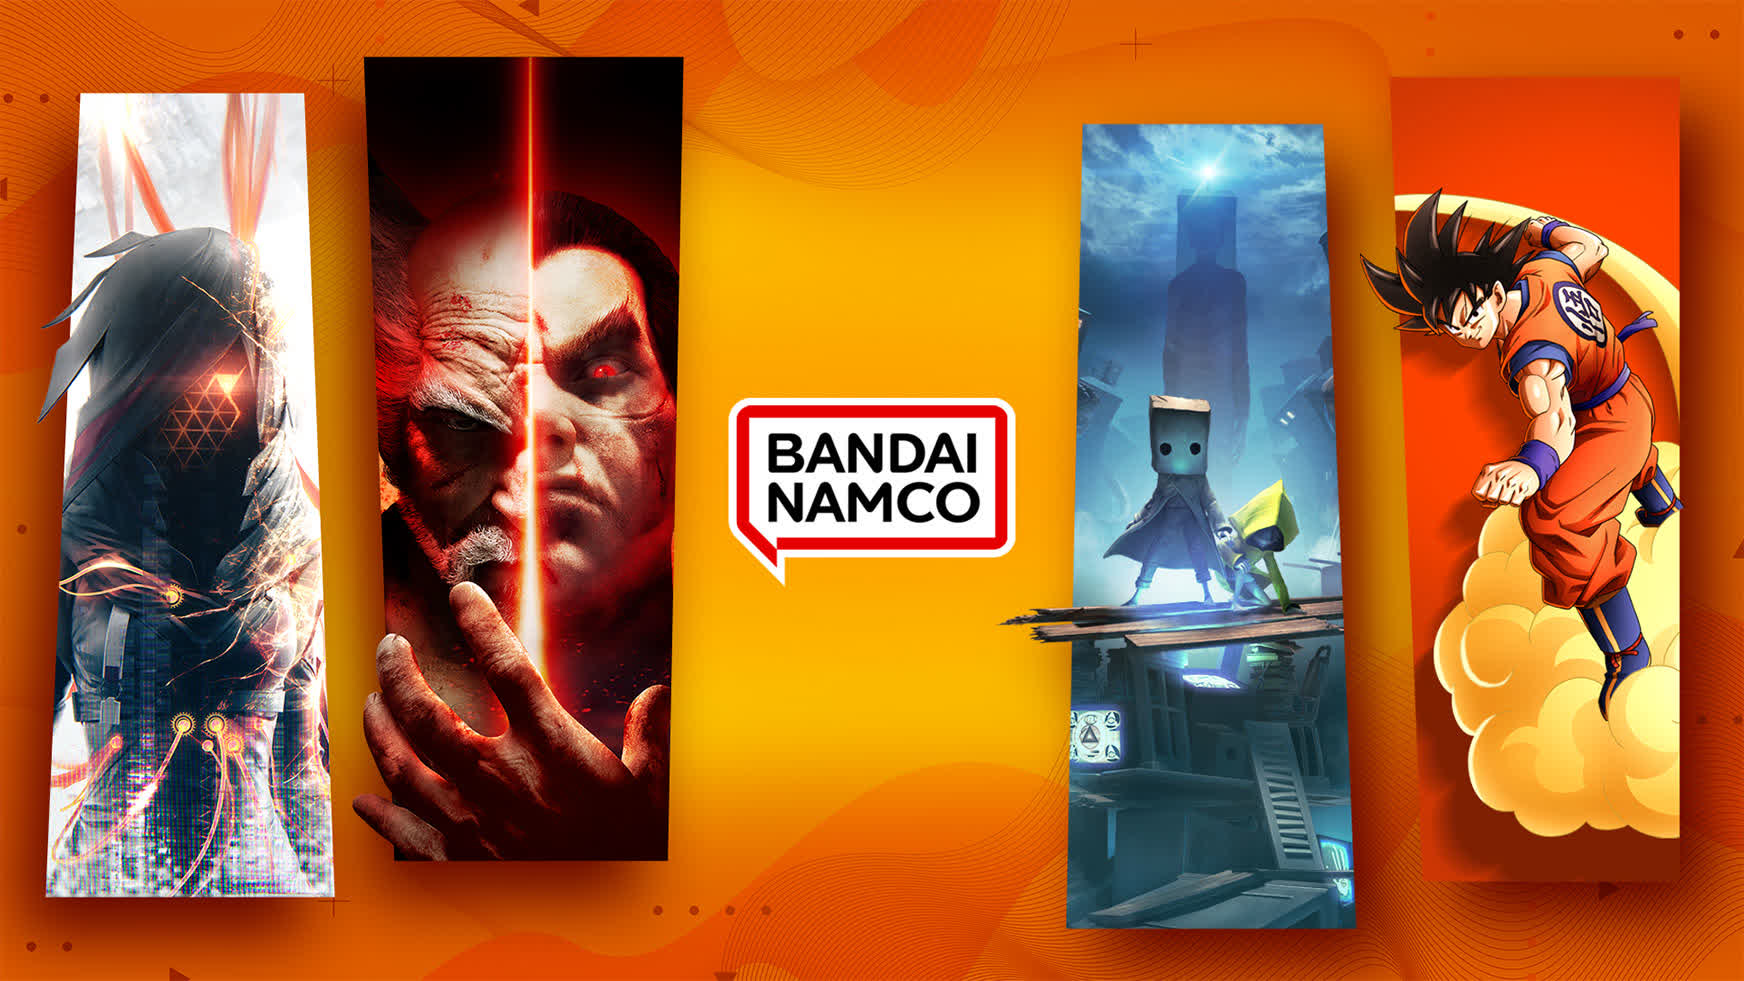 Bandai Namco confirms hack, is investigating the scope of the damage